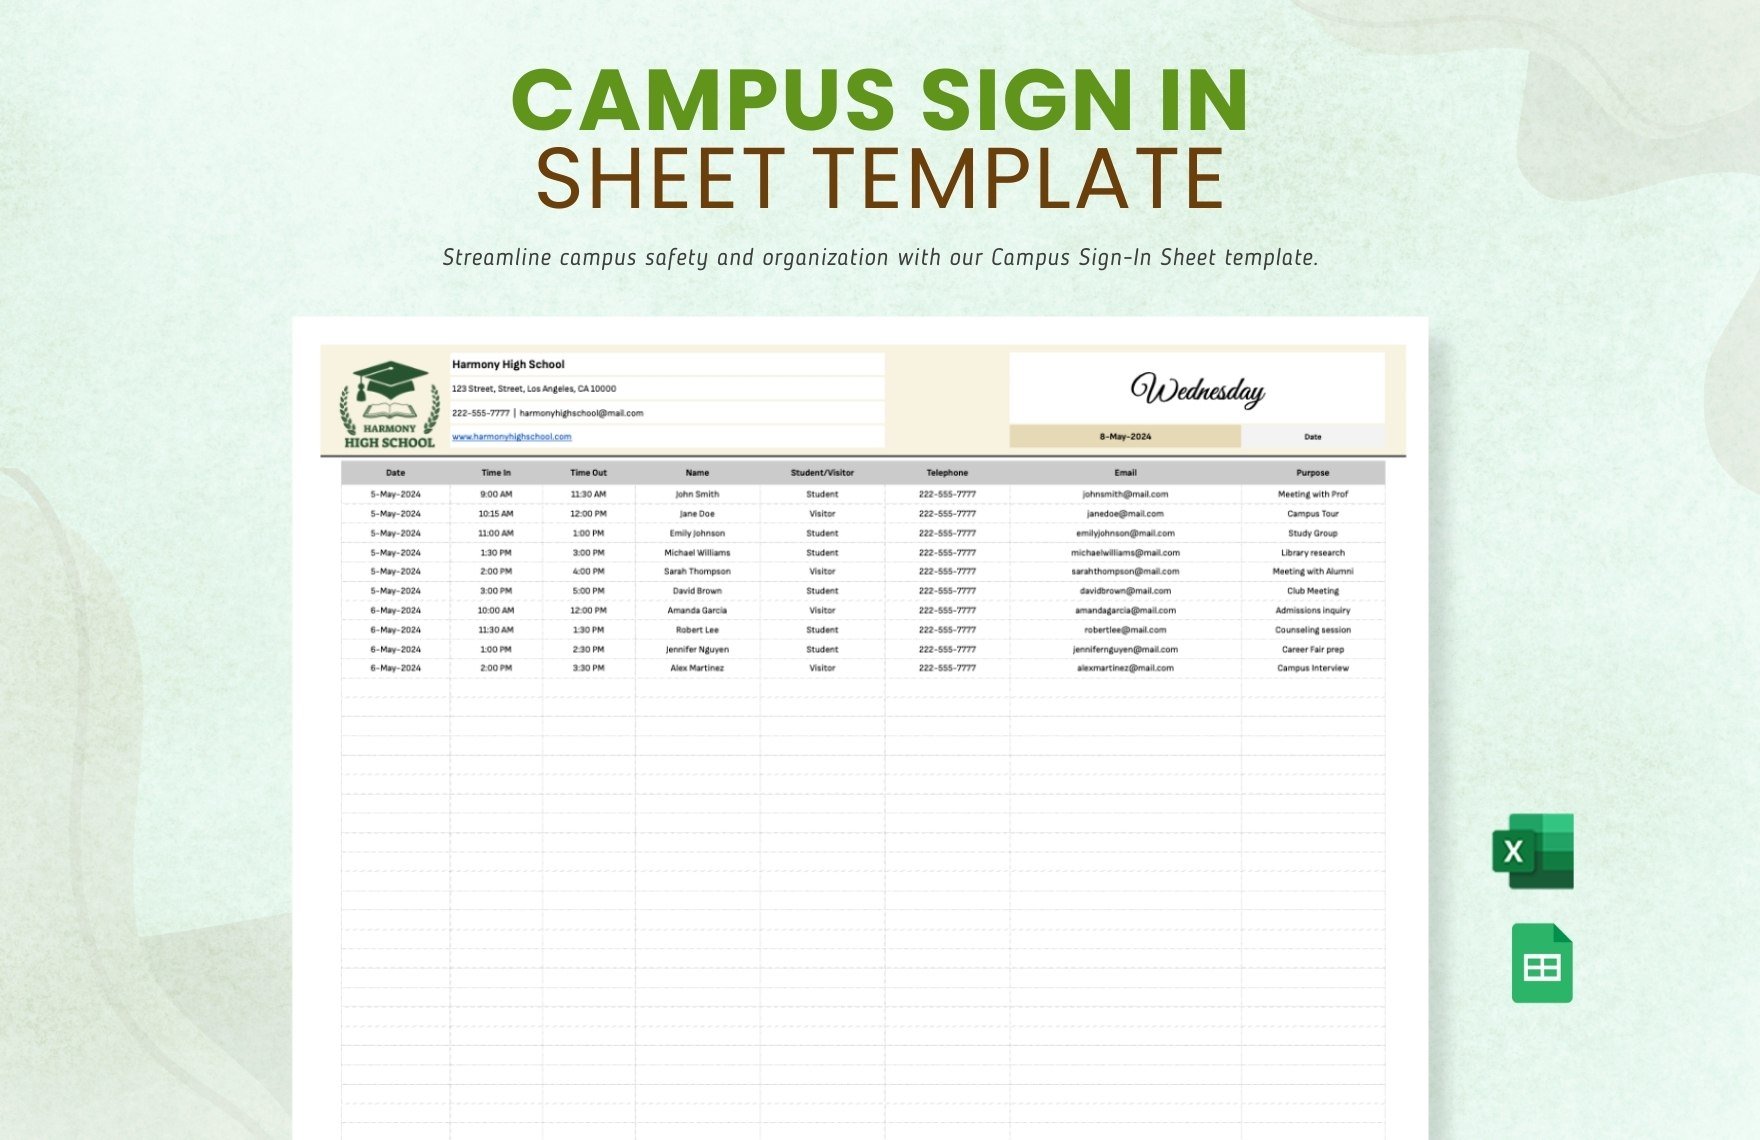 Campus Sign in Sheet Template